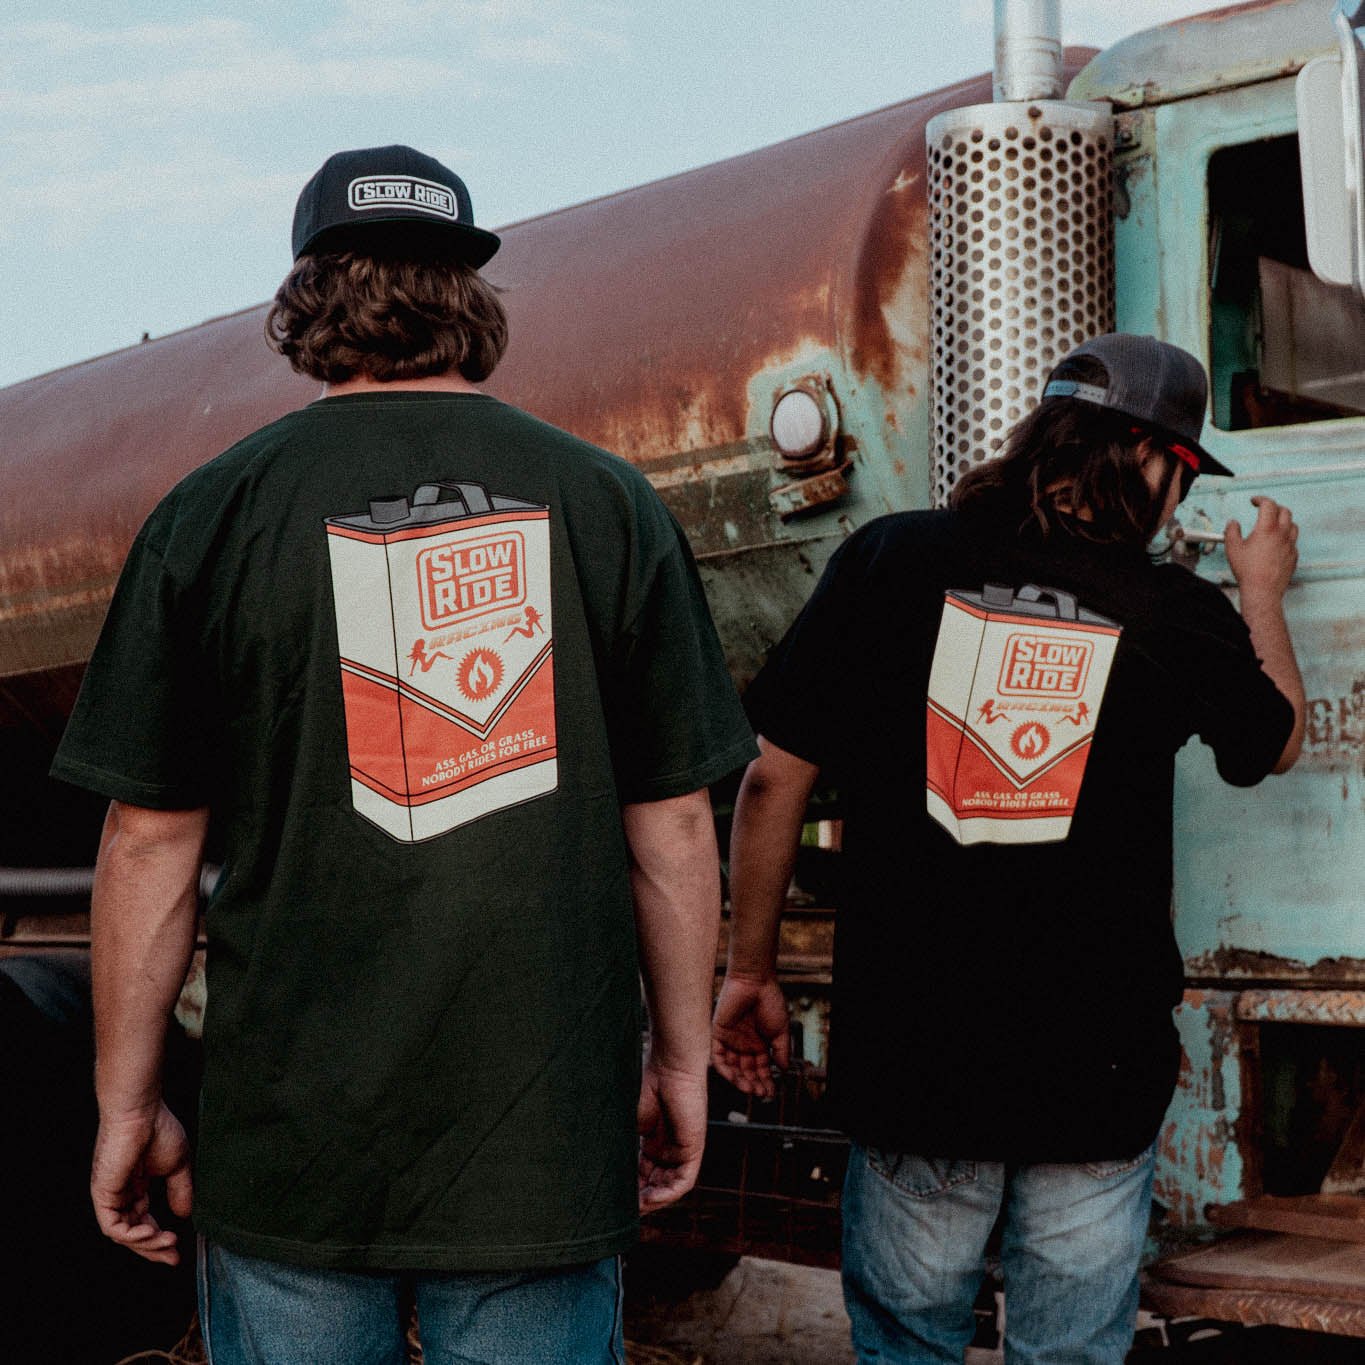 Gas Can Tee (Black) - Slow Ride